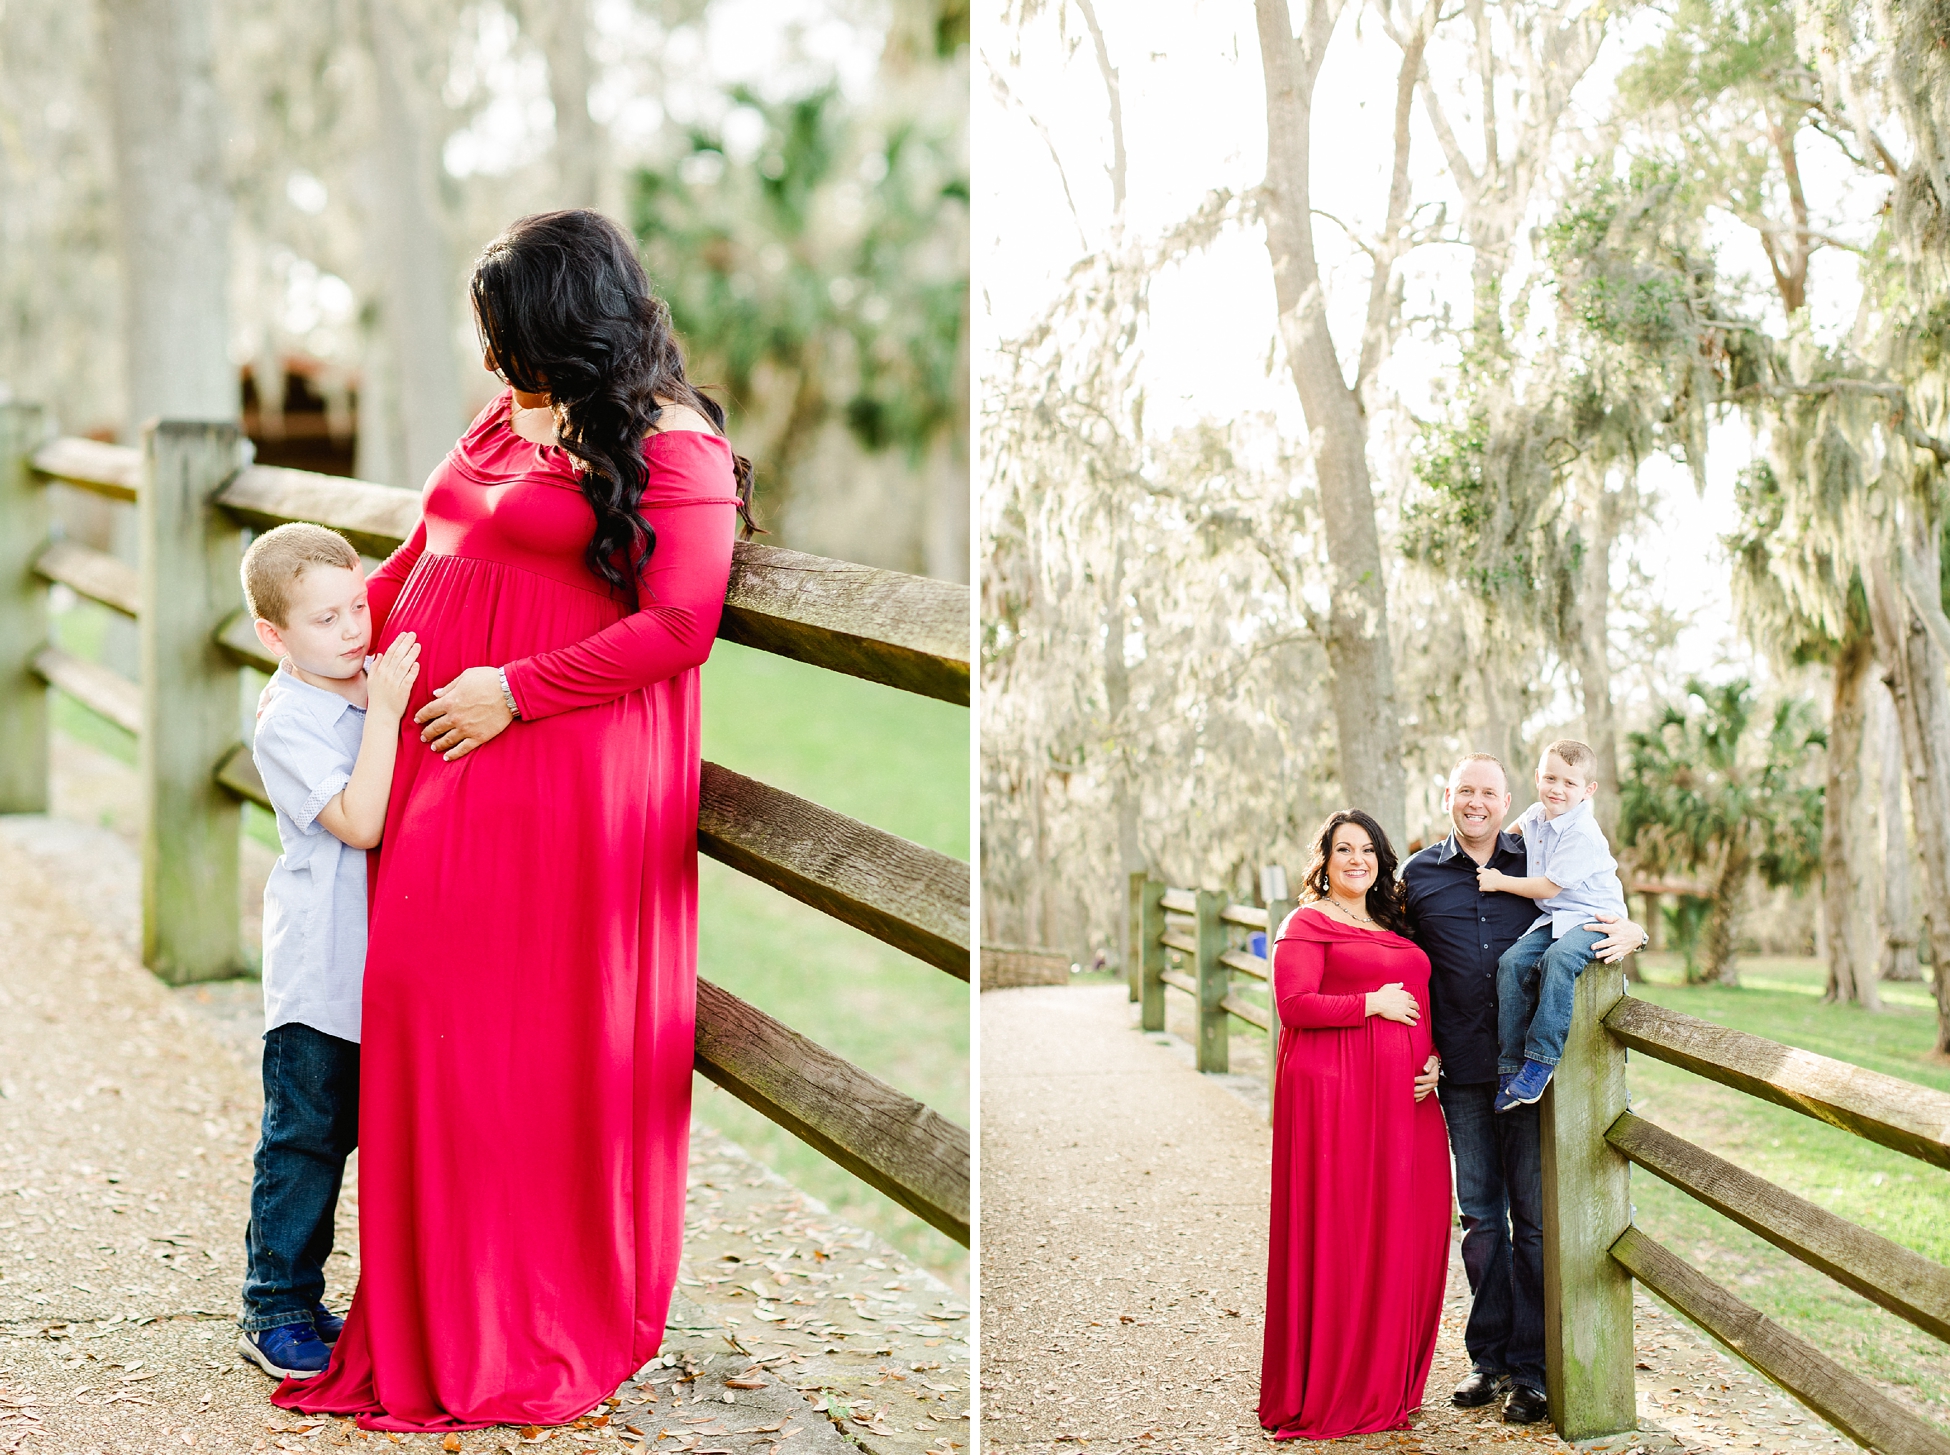 Maternity Photographer | © Ailyn LaTorre Photography 2018